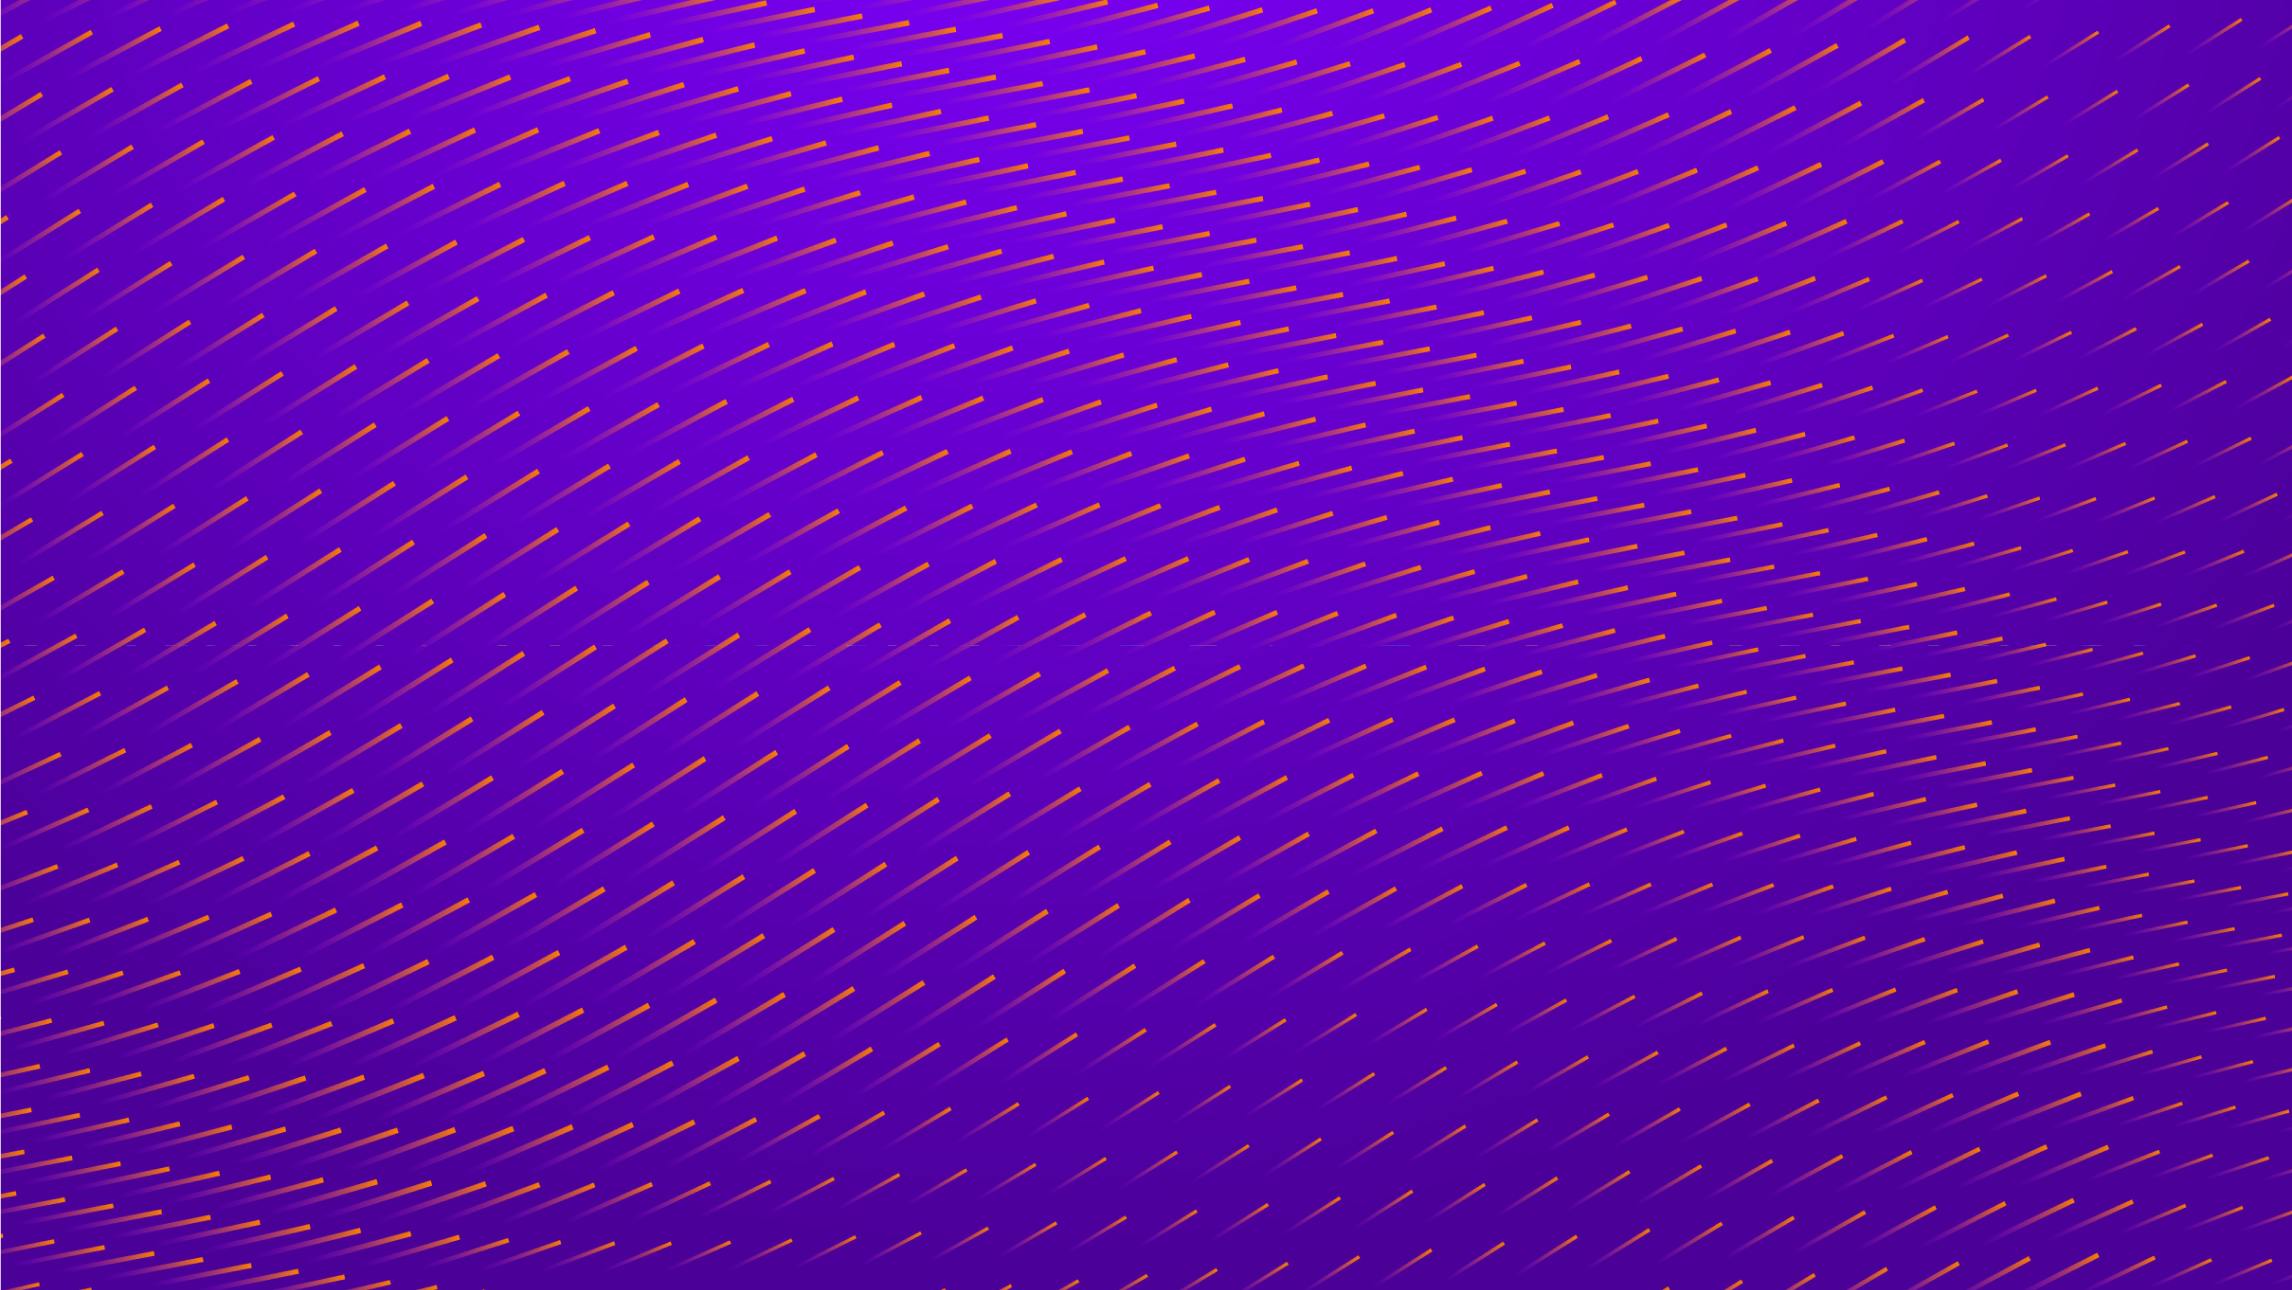 A digital rendering of many small peach lines, repeated at varying angles on a purple background. The many small lines create a visual affect of waves or movement.